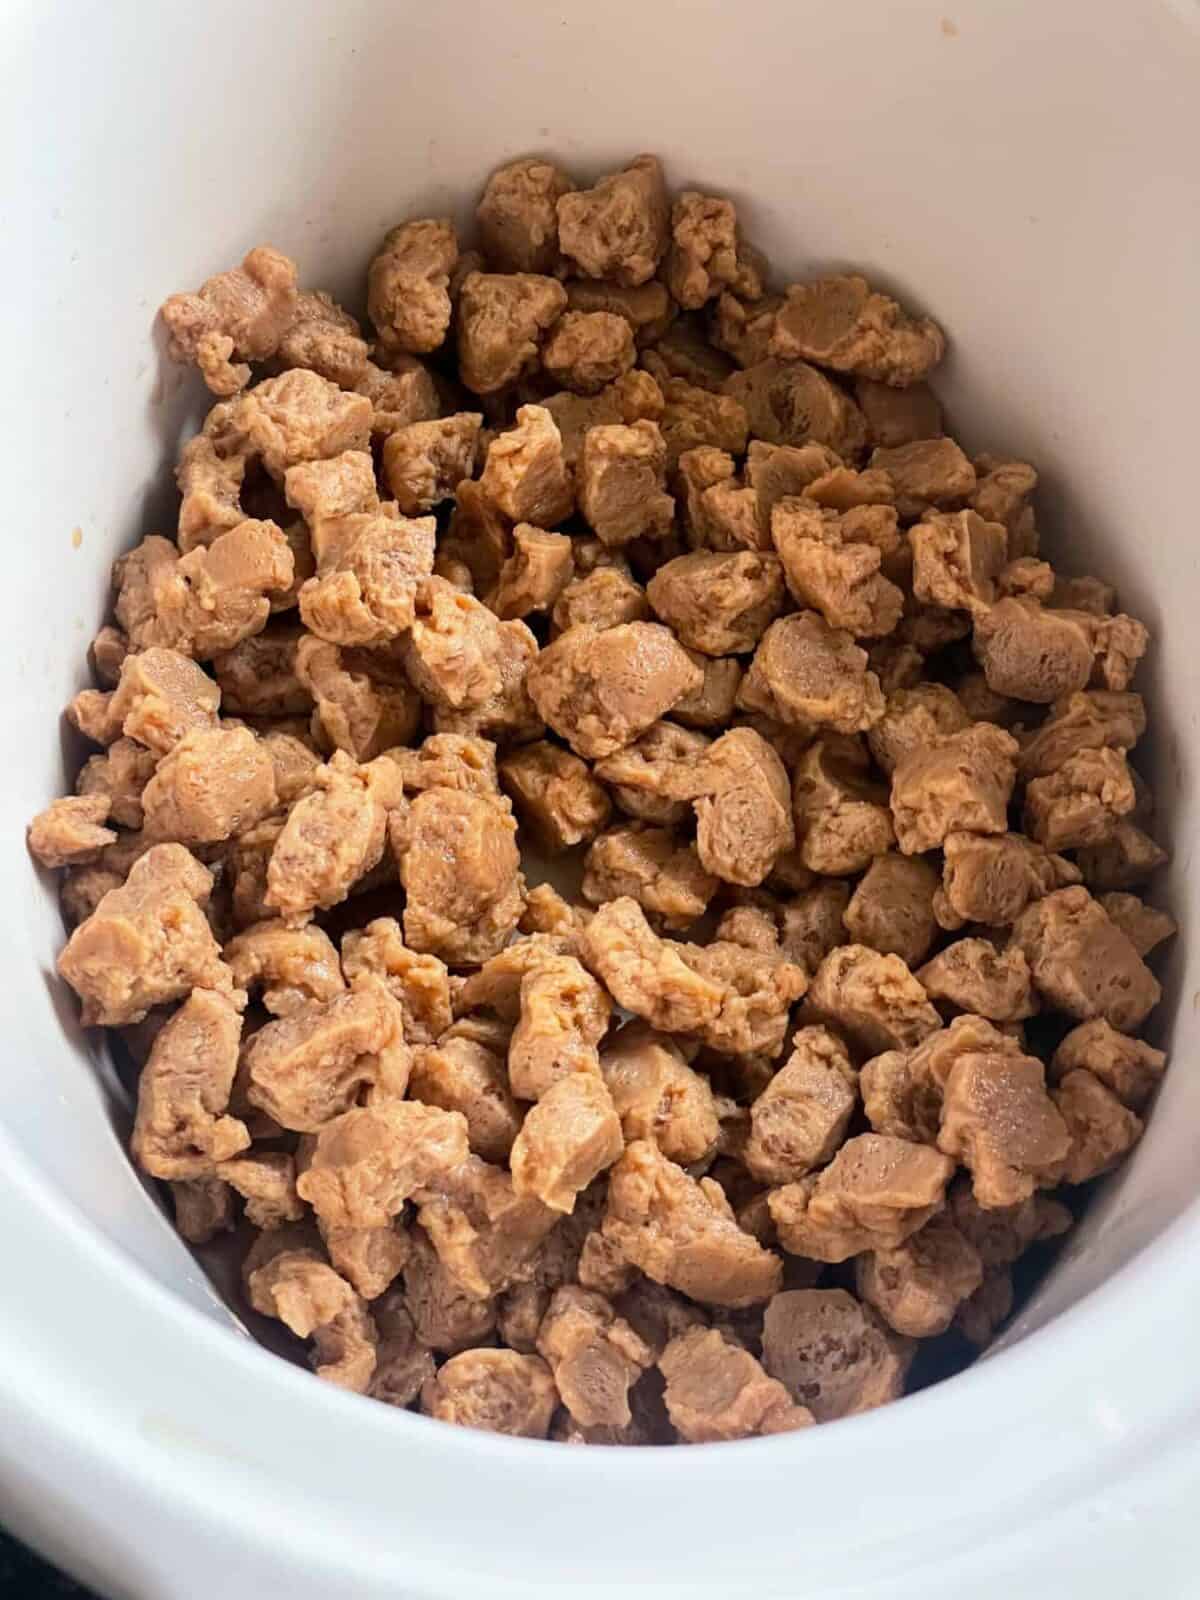 Hydrated soya chunks in slow cooker.